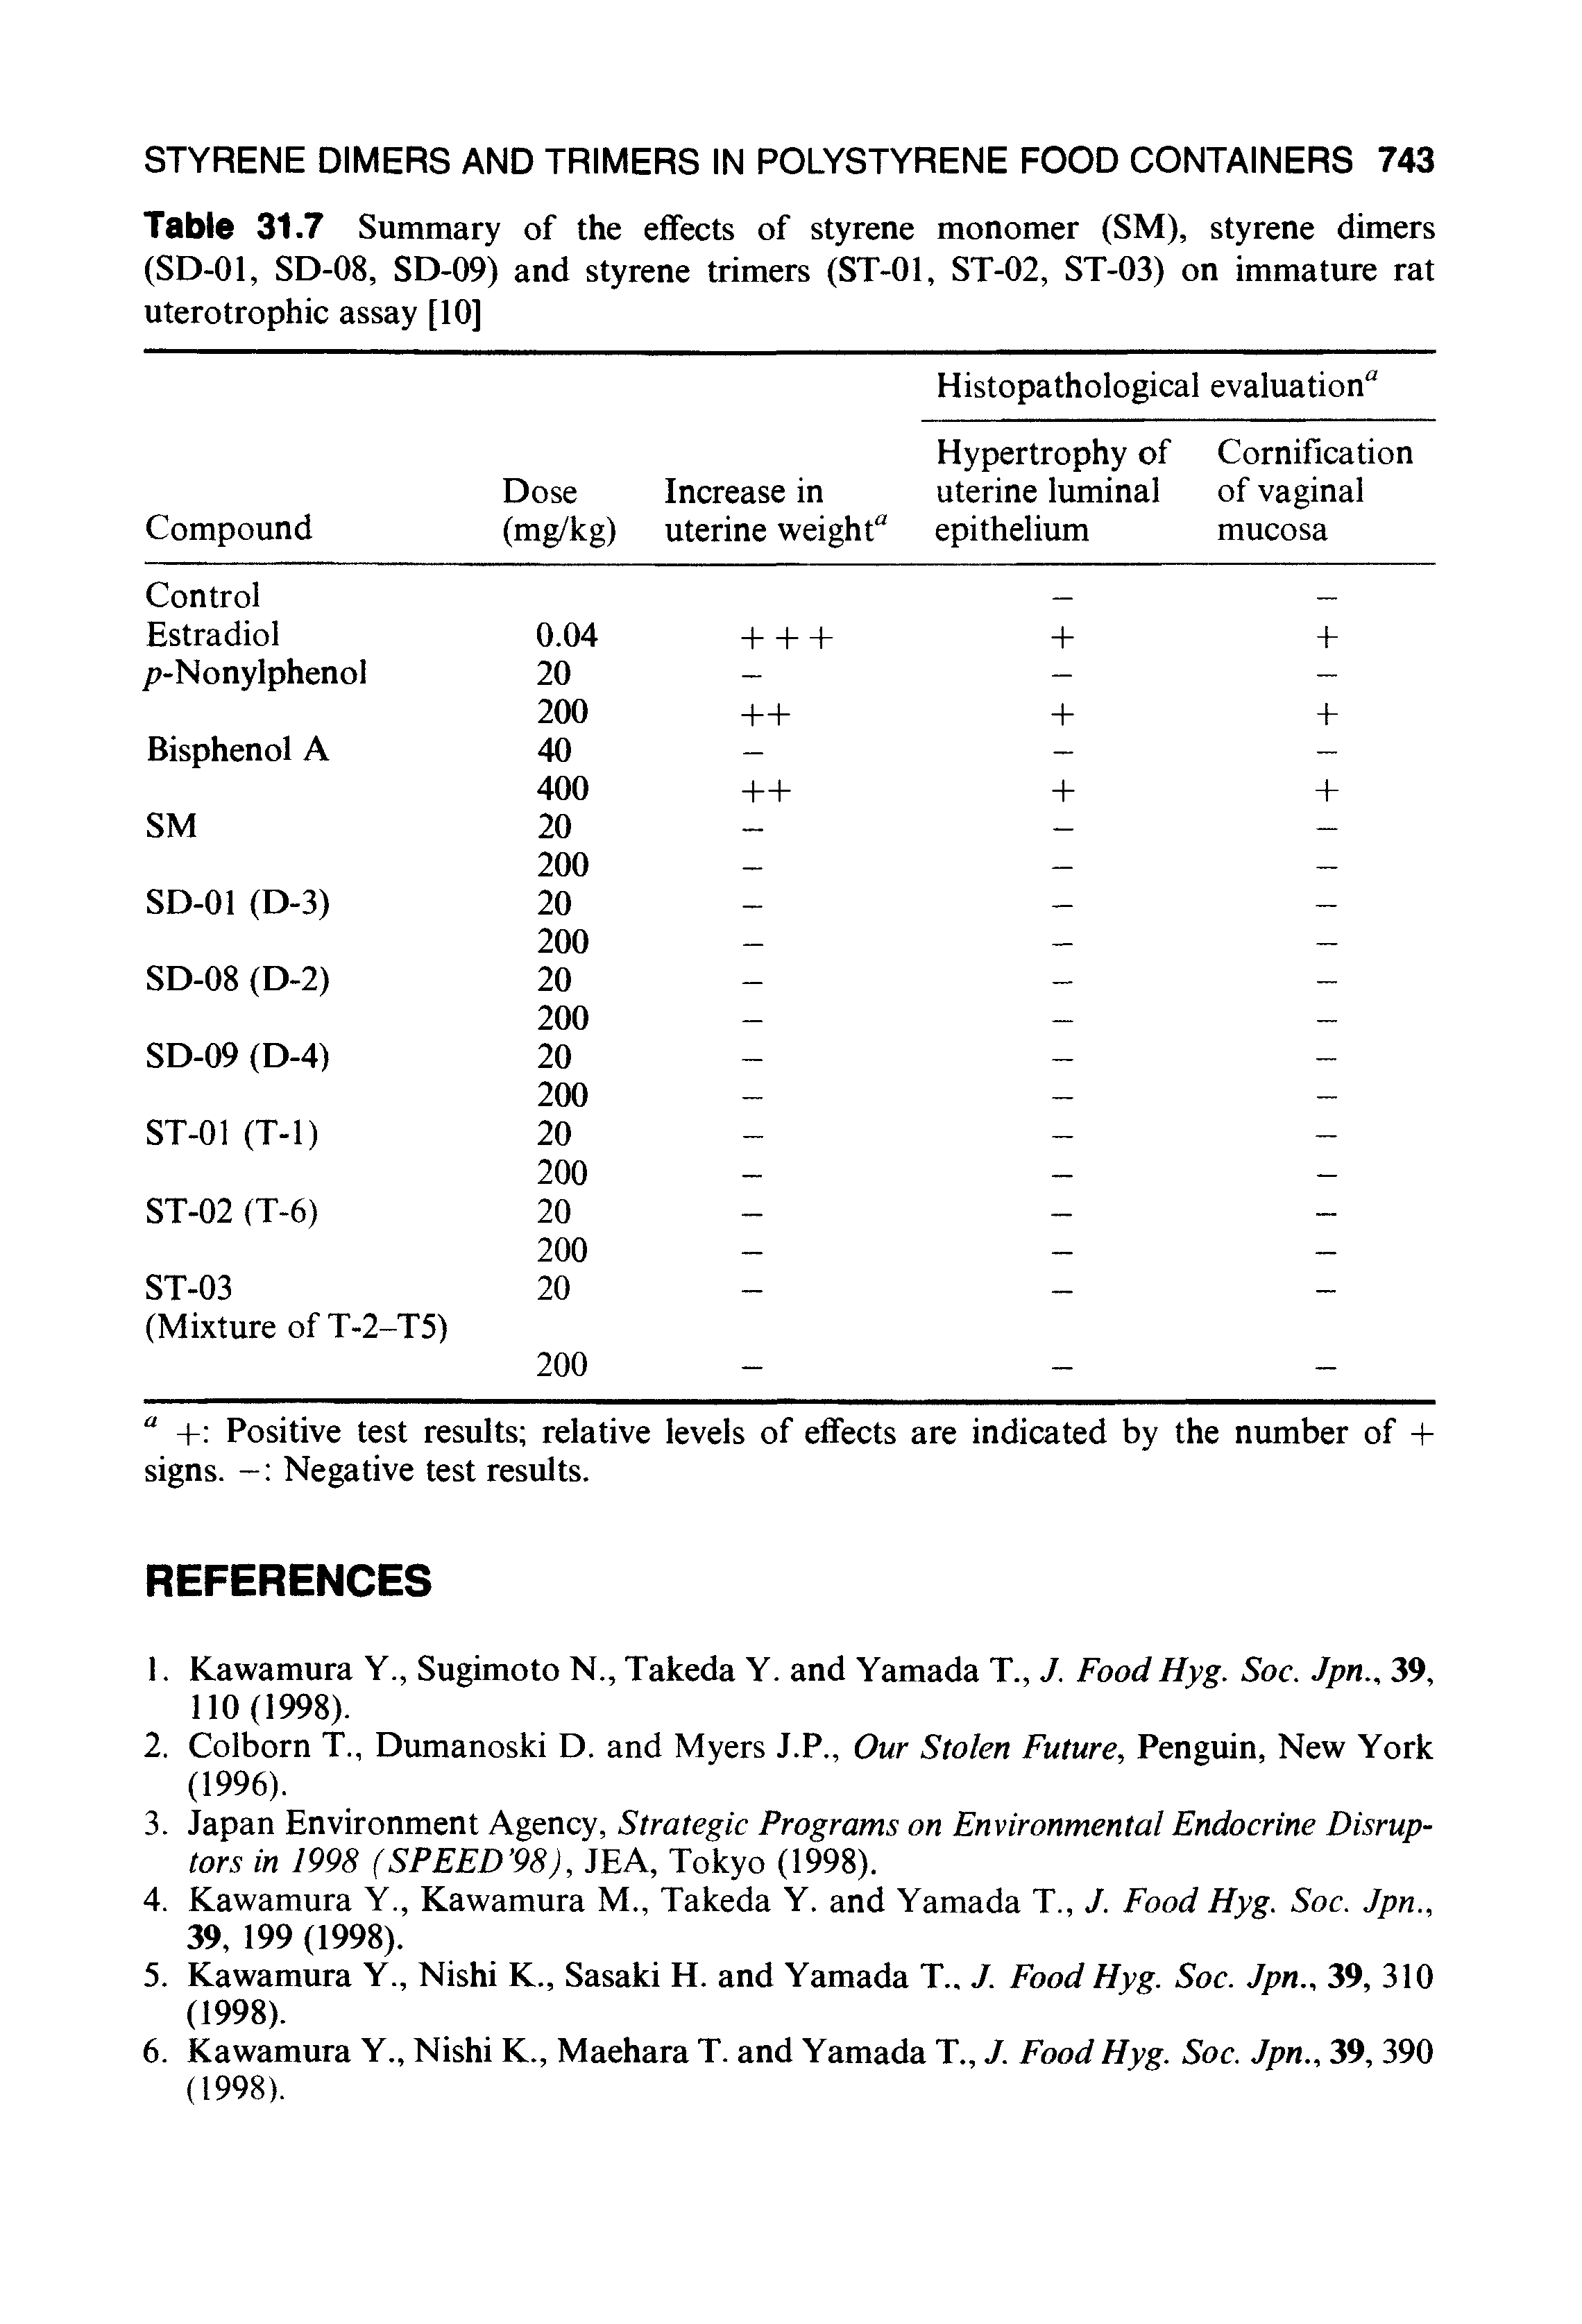 Table 31.7 Summary of the effects of styrene monomer (SM), styrene dimers (SD-01, SD-08, SD-09) and styrene trimers (ST-01, ST-02, ST-03) on immature rat uterotrophic assay [10]...